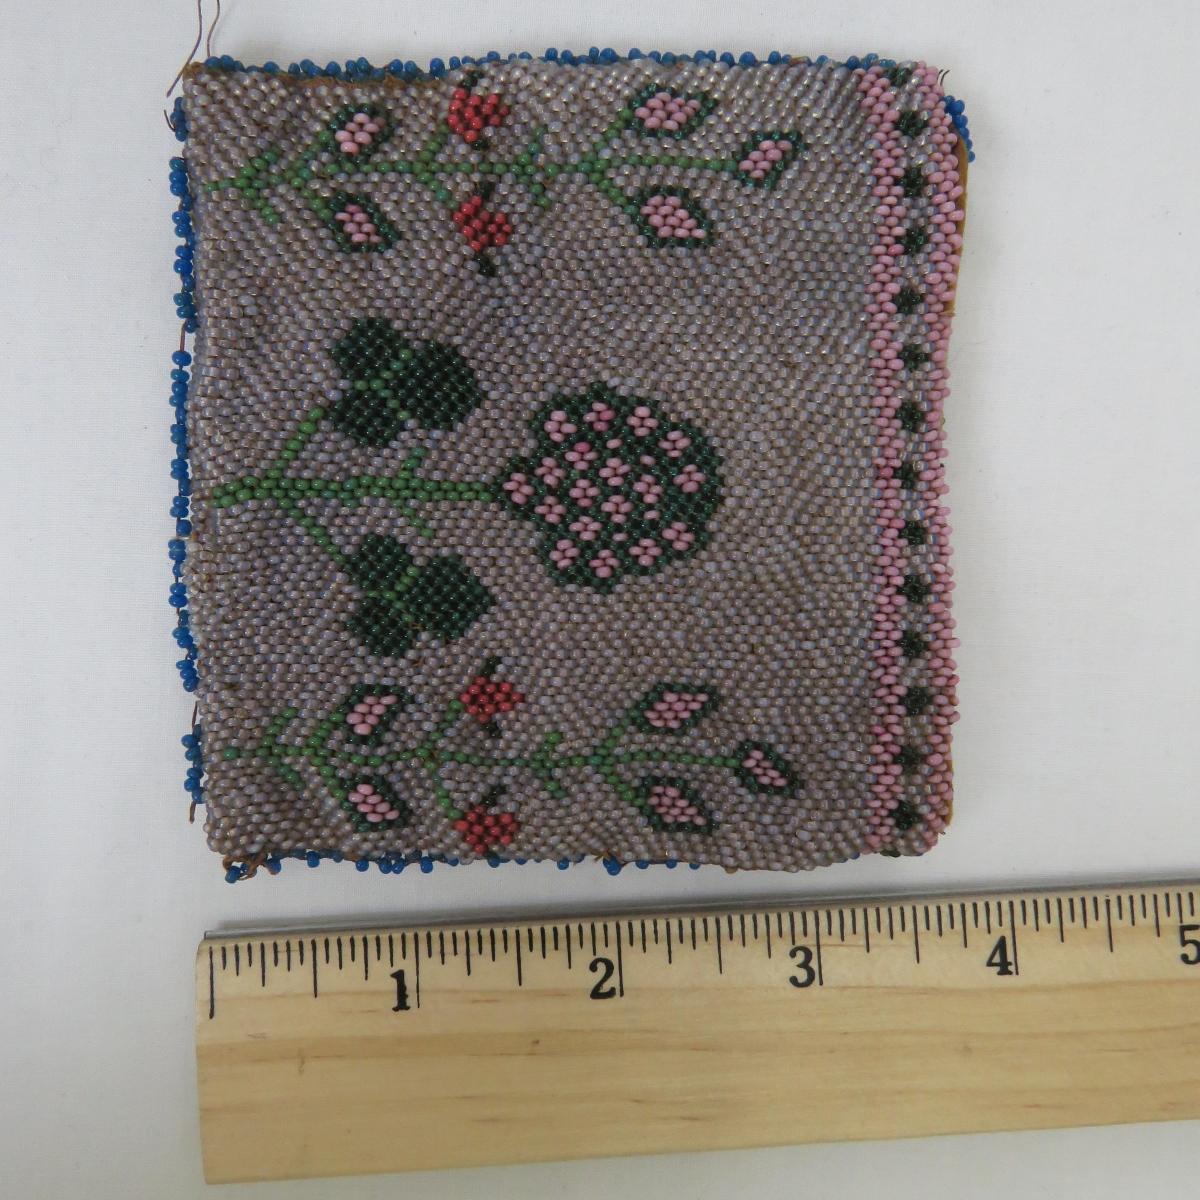 Antique Hand Stitched & Beaded Purses and More